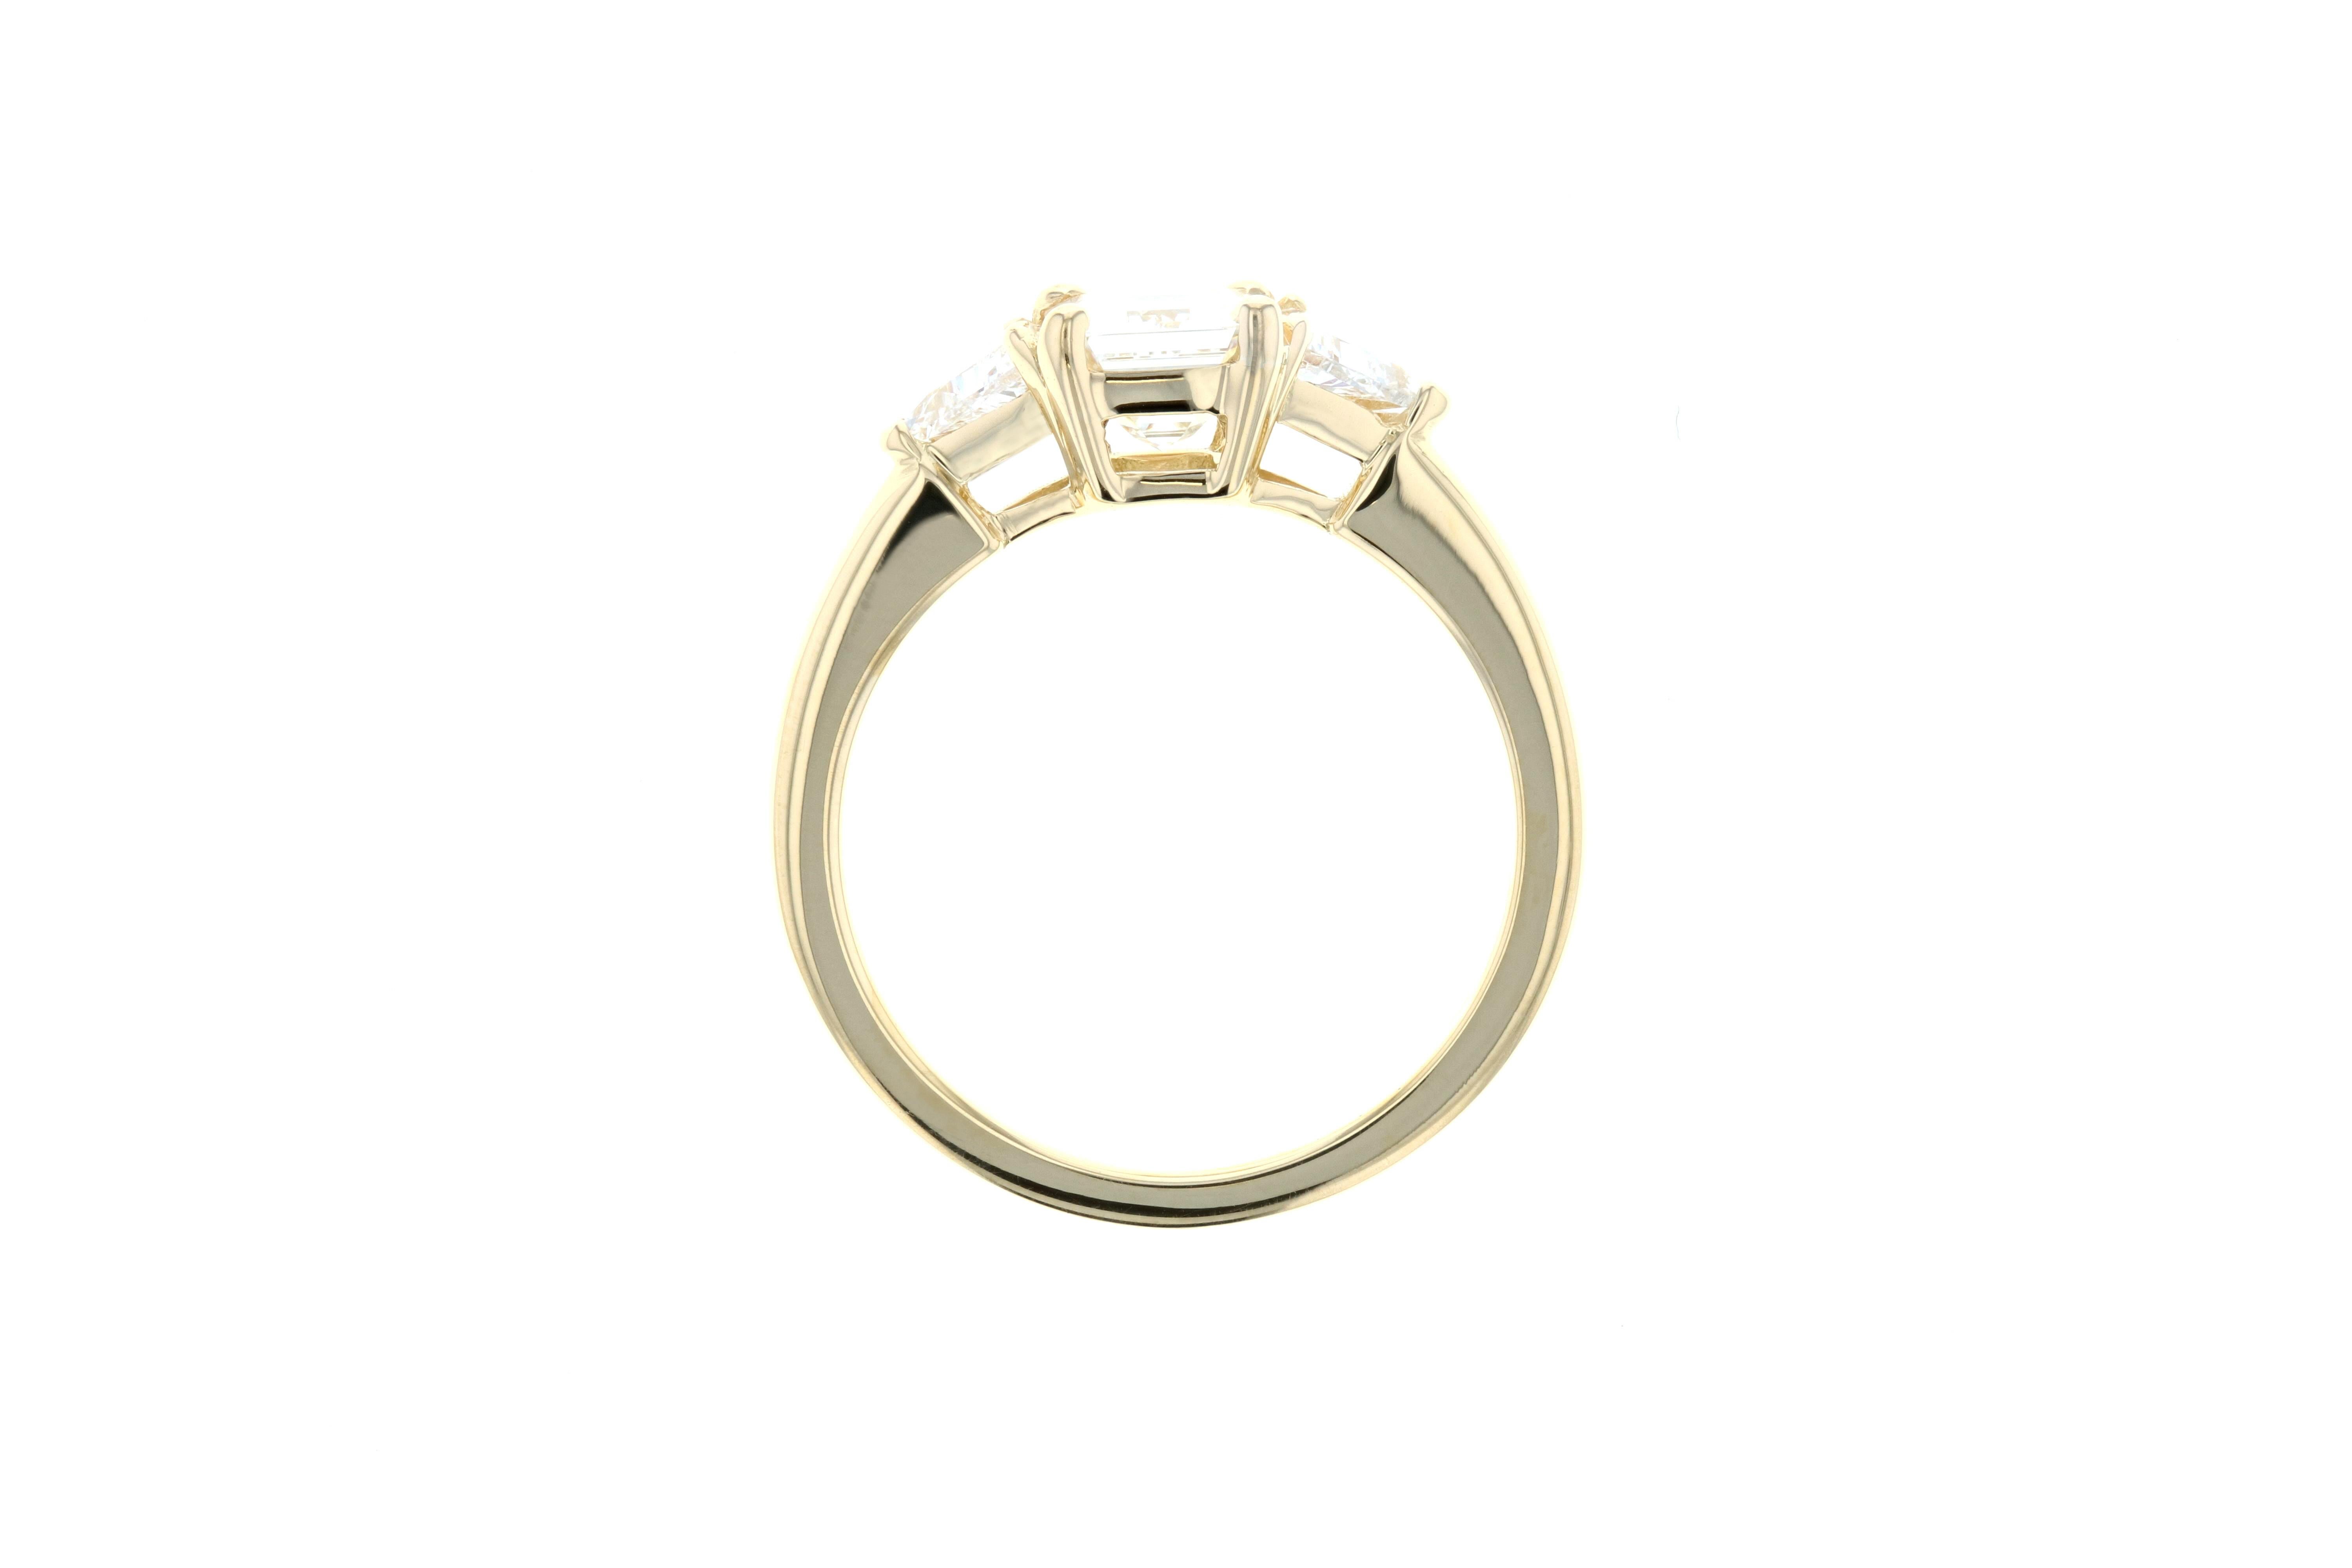 This engagement ring has a 1 carat center diamond and two diamond side trillions with a yellow gold setting and a gallery profile for a vintage look and feel. 


Though this diamond ring is shown in yellow gold and with an emerald cut center stone,